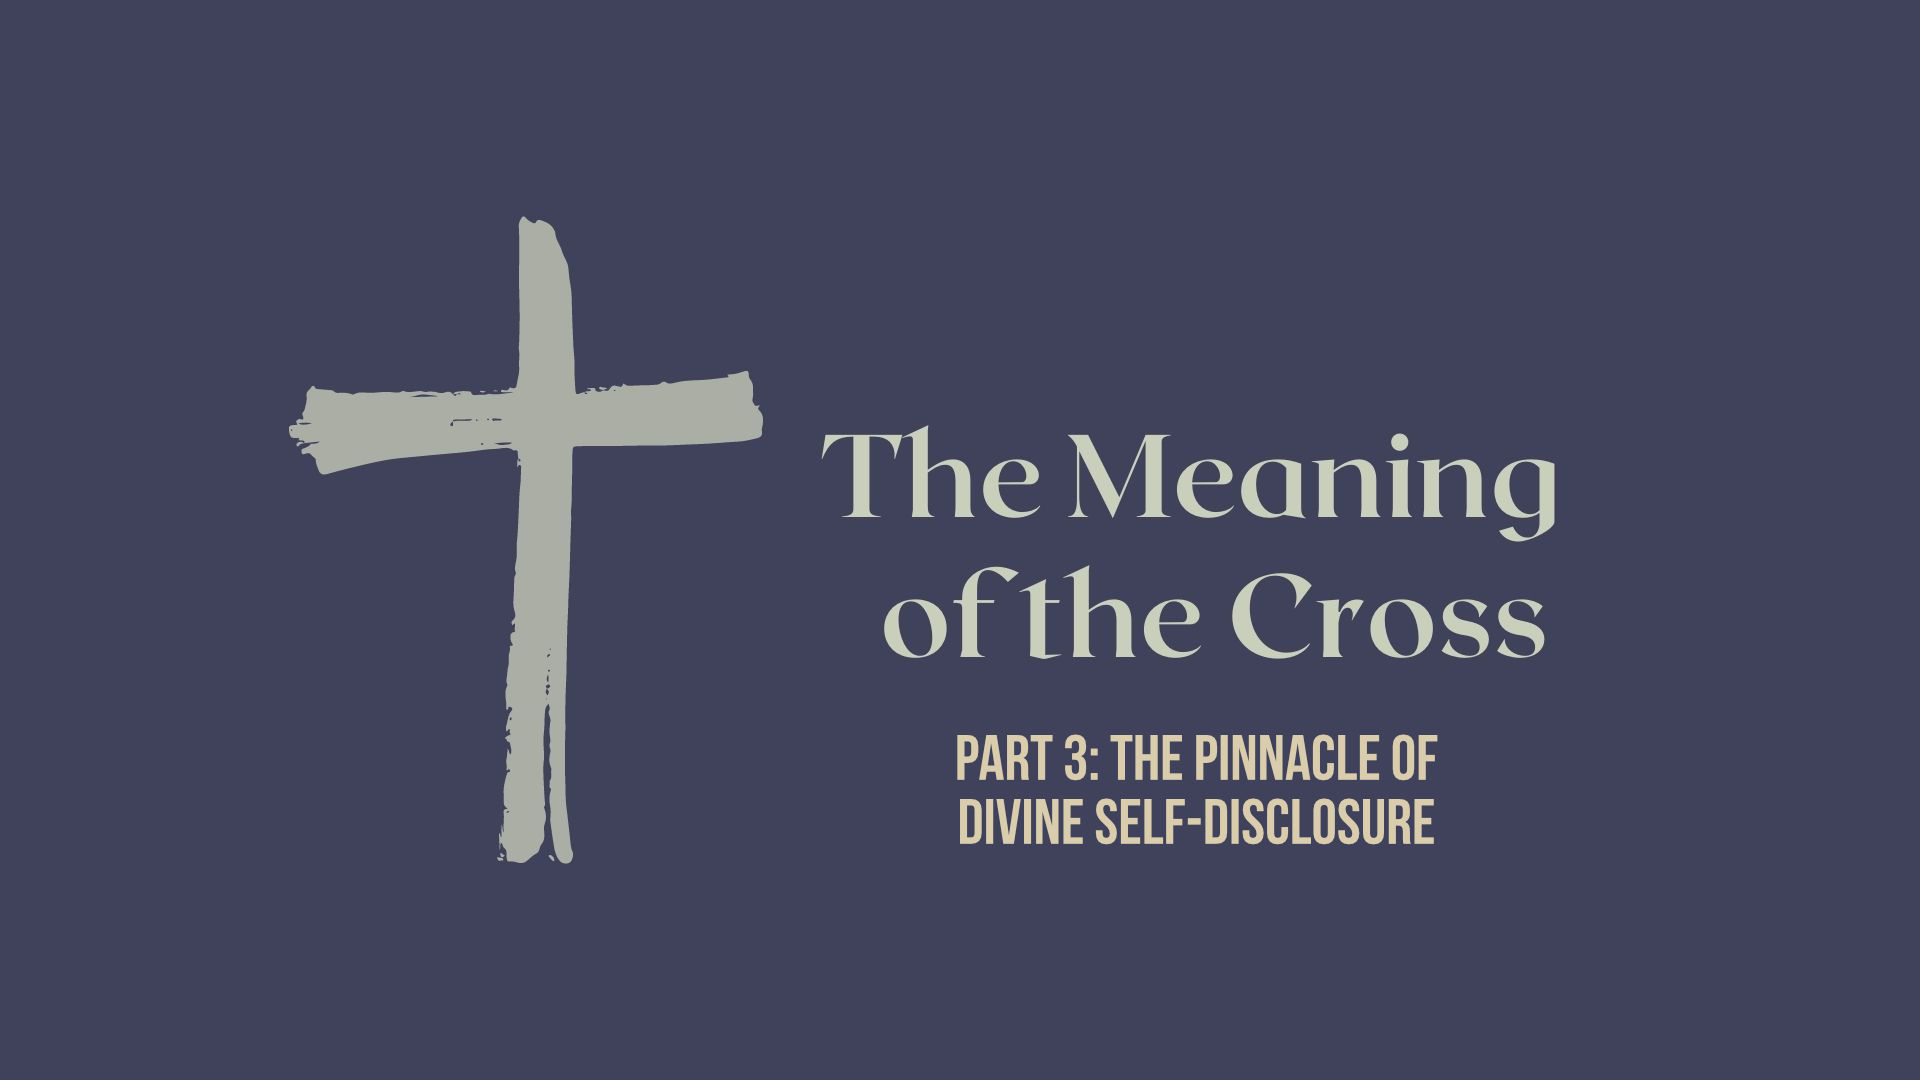 The Meaning of the Cross: Pinnacle of Self-Disclosure - Emmaus Road Church